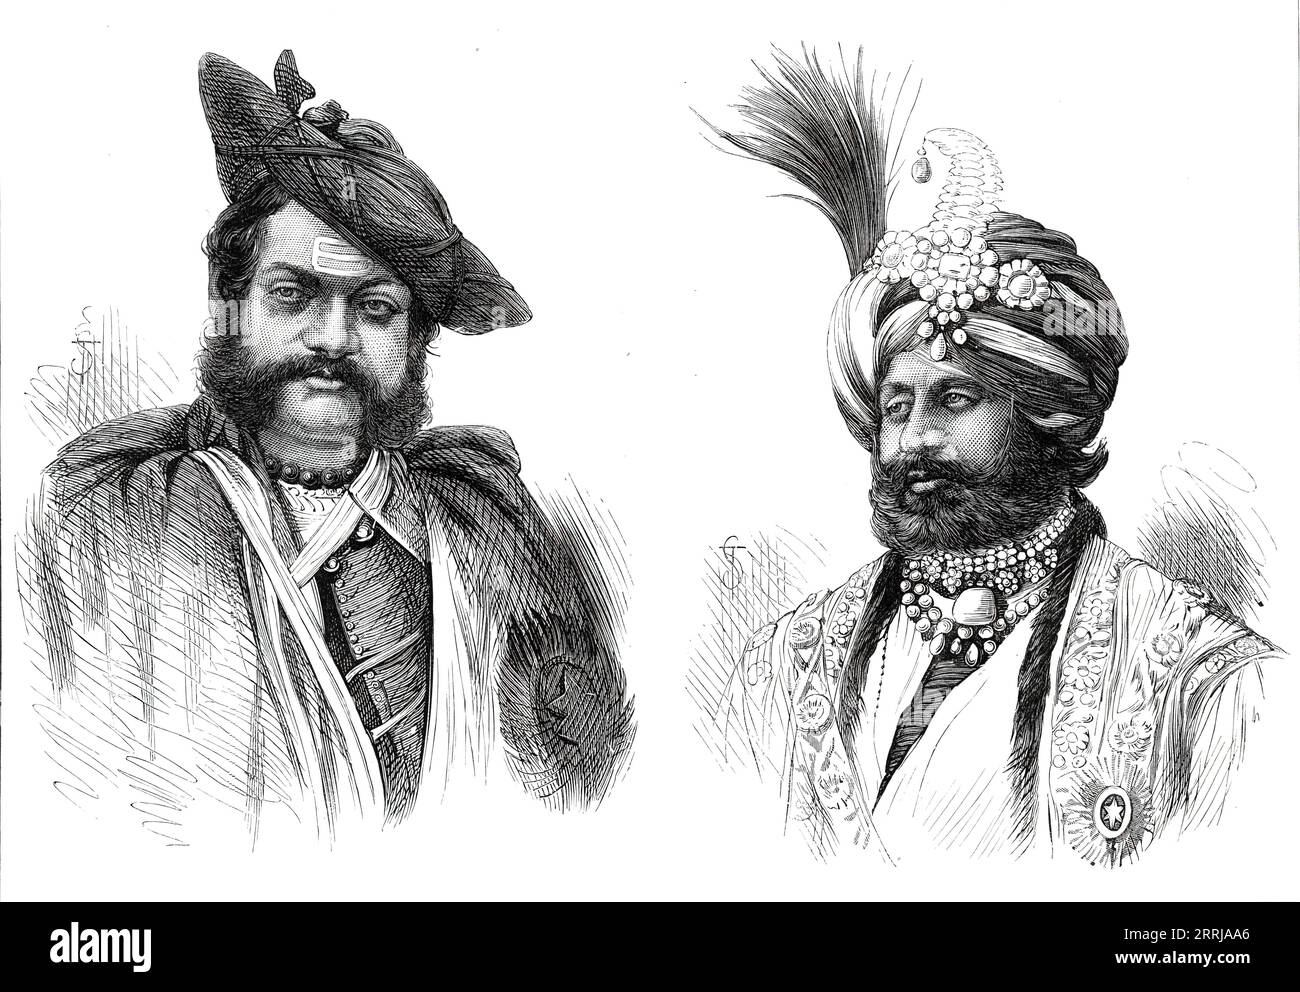 The Maharajah Scindia of Gwalior; The Maharajah of Cashmere, 1876. 'It should be observed that the Mahratta potentates of Western India are now valuable allies of the British Government. Scindia was overthrown in the Sepoy War of 1858, by a rebellion headed by Tantia Topee and the Ranee or Dowager Princess of Jhansi, at the instigation of Nana Sahib. He was restored by the British force under Sir Hugh Rose, now Lord Strathnairn, who stormed the rock- fortress of Gwalior'. From &quot;Illustrated London News&quot;, 1876. Stock Photo